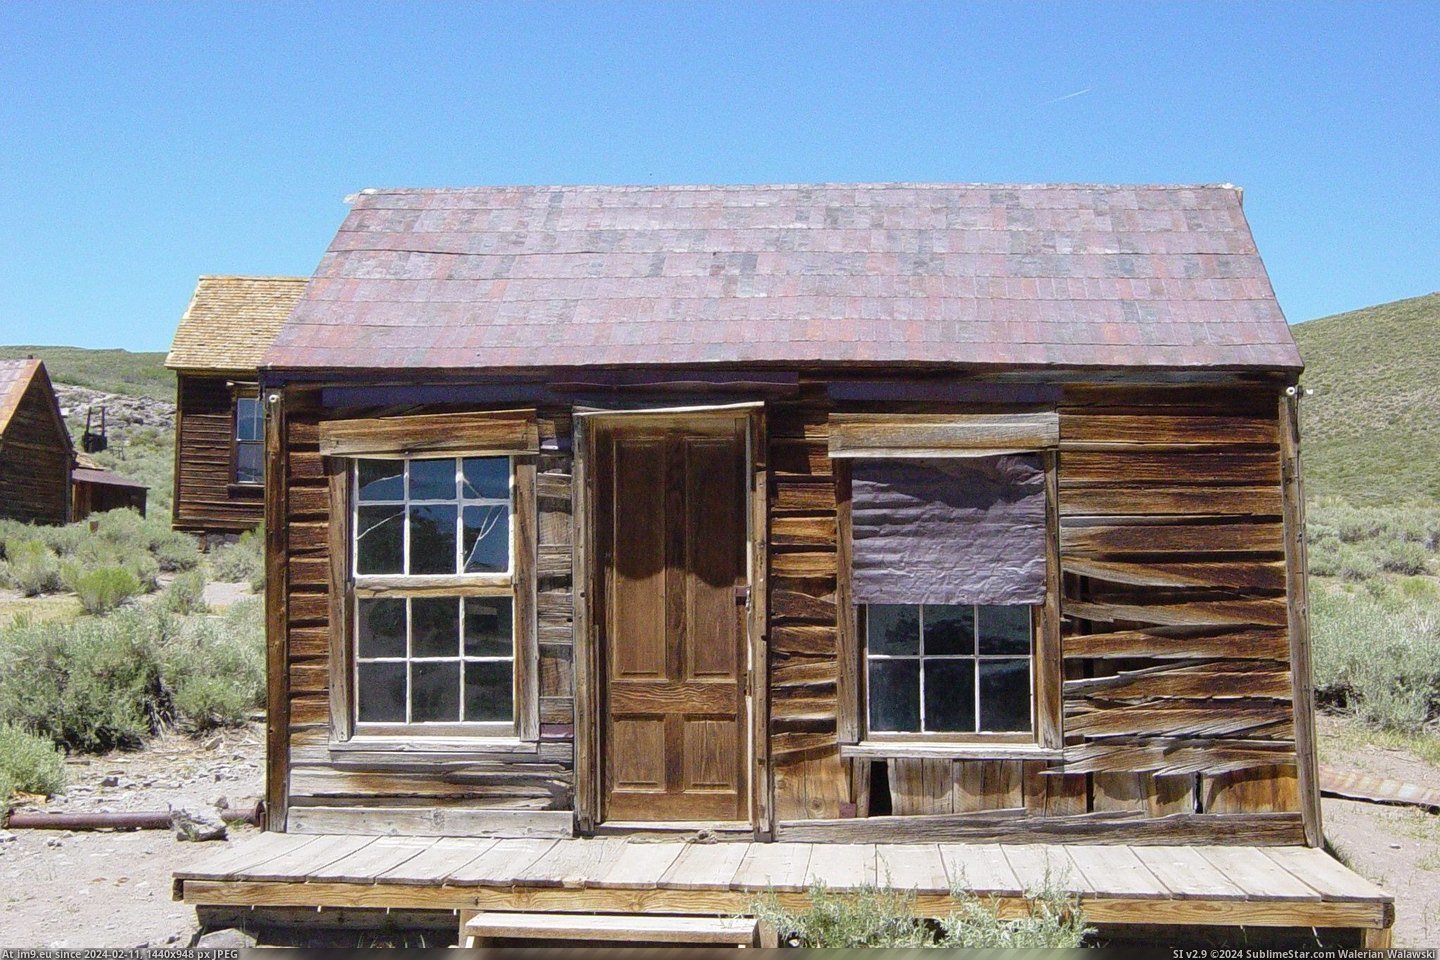 #California #House #Moyle #North #Bodie Moyle House North In Bodie, California Pic. (Bild von album Bodie - a ghost town in Eastern California))